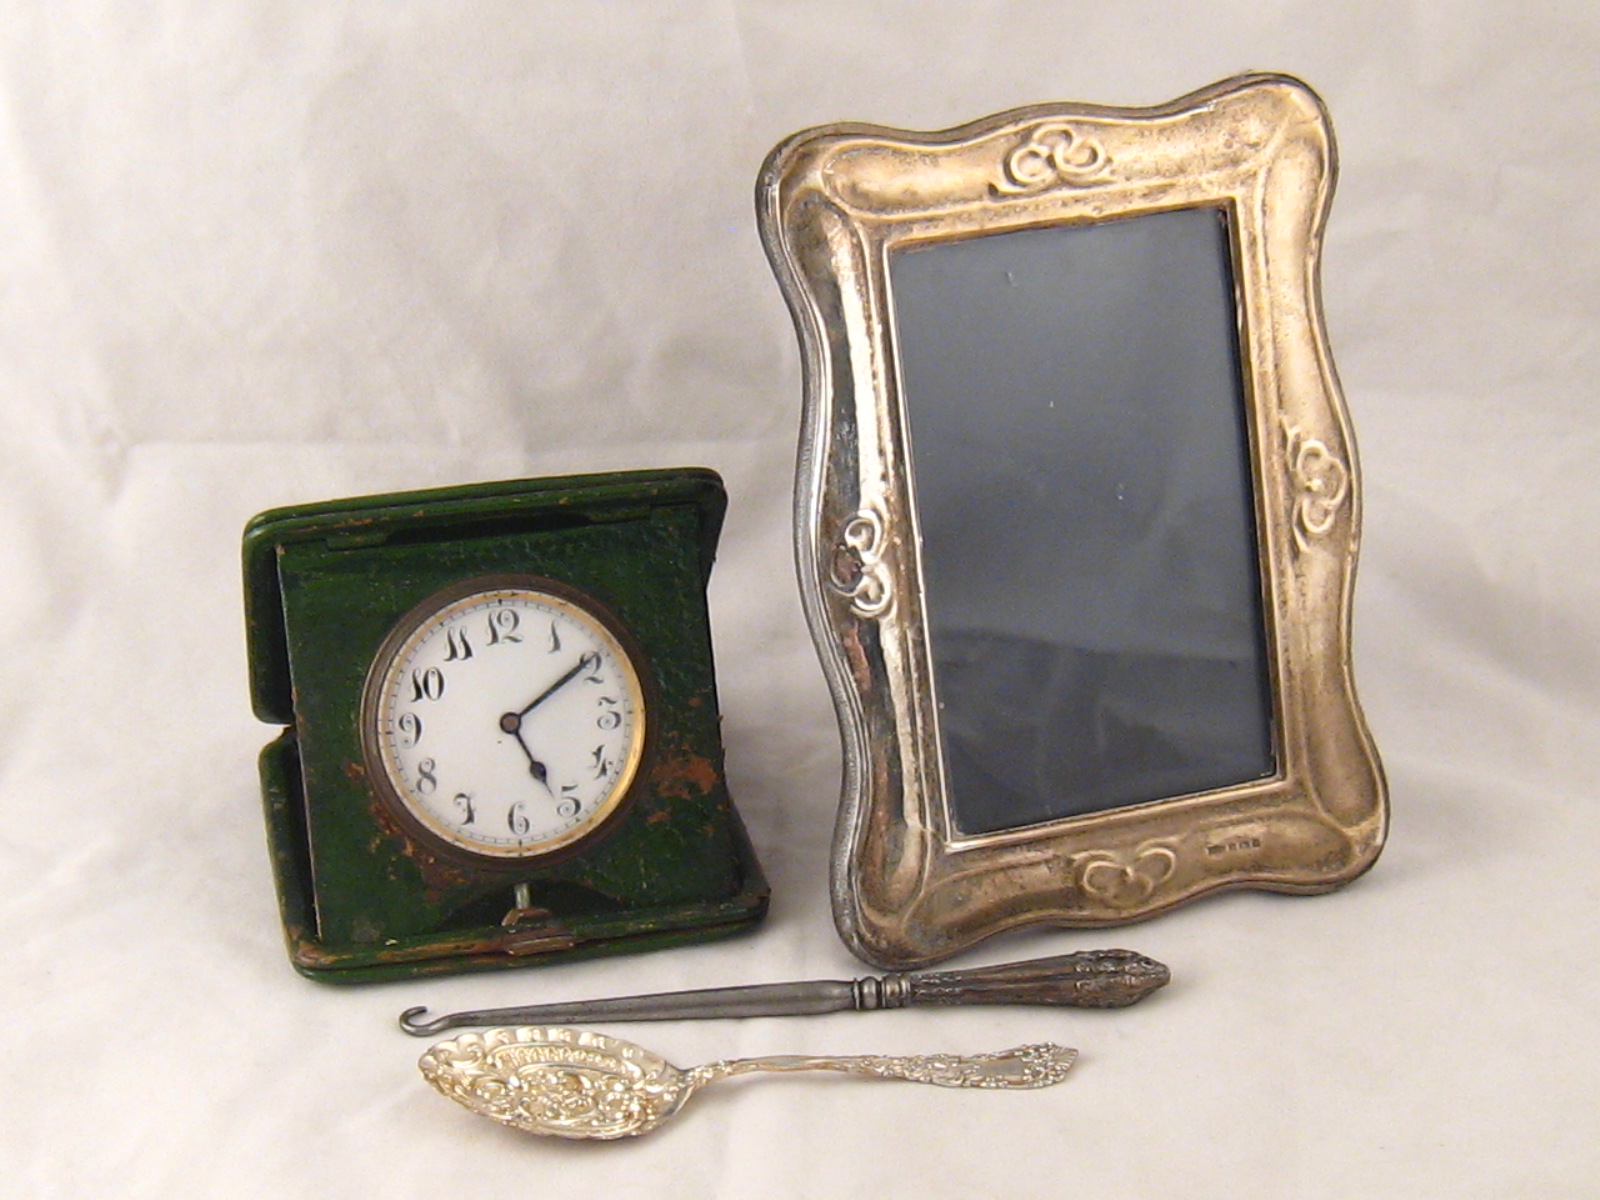 A travelling clock in stand up green leather case, c.1920, a silver faced photo frame, 13x18cms ,a